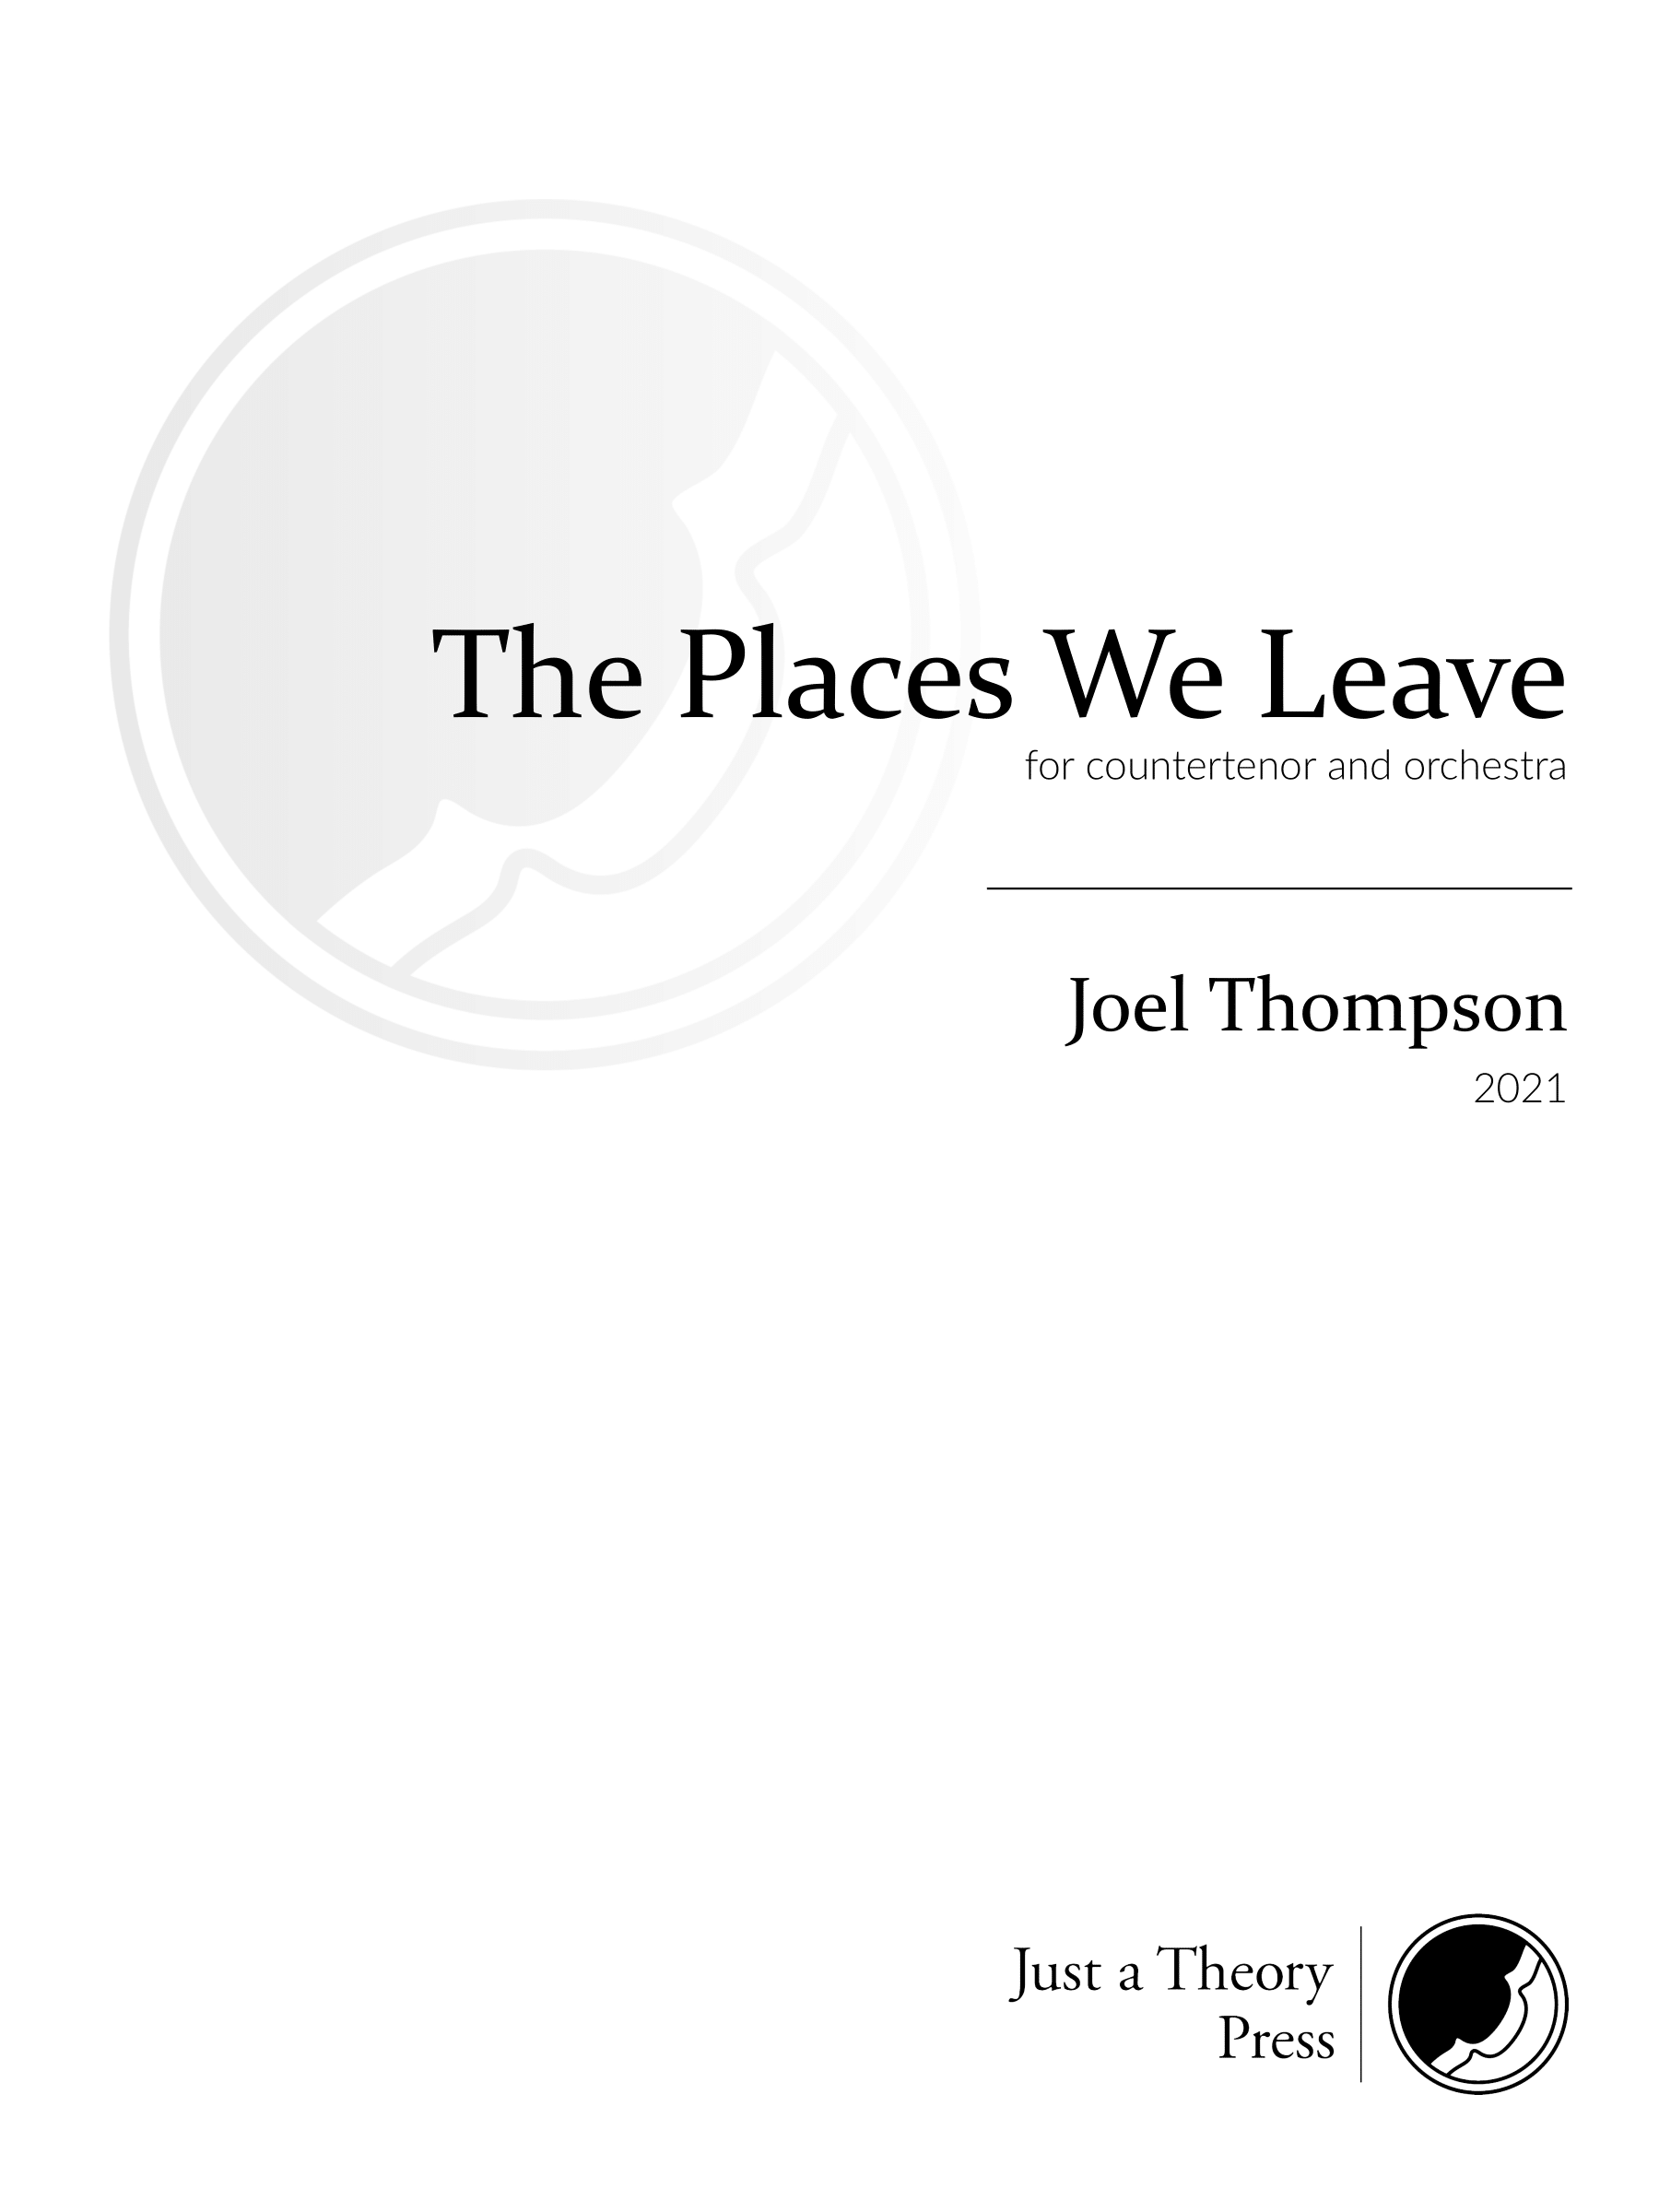 The Places We Leave